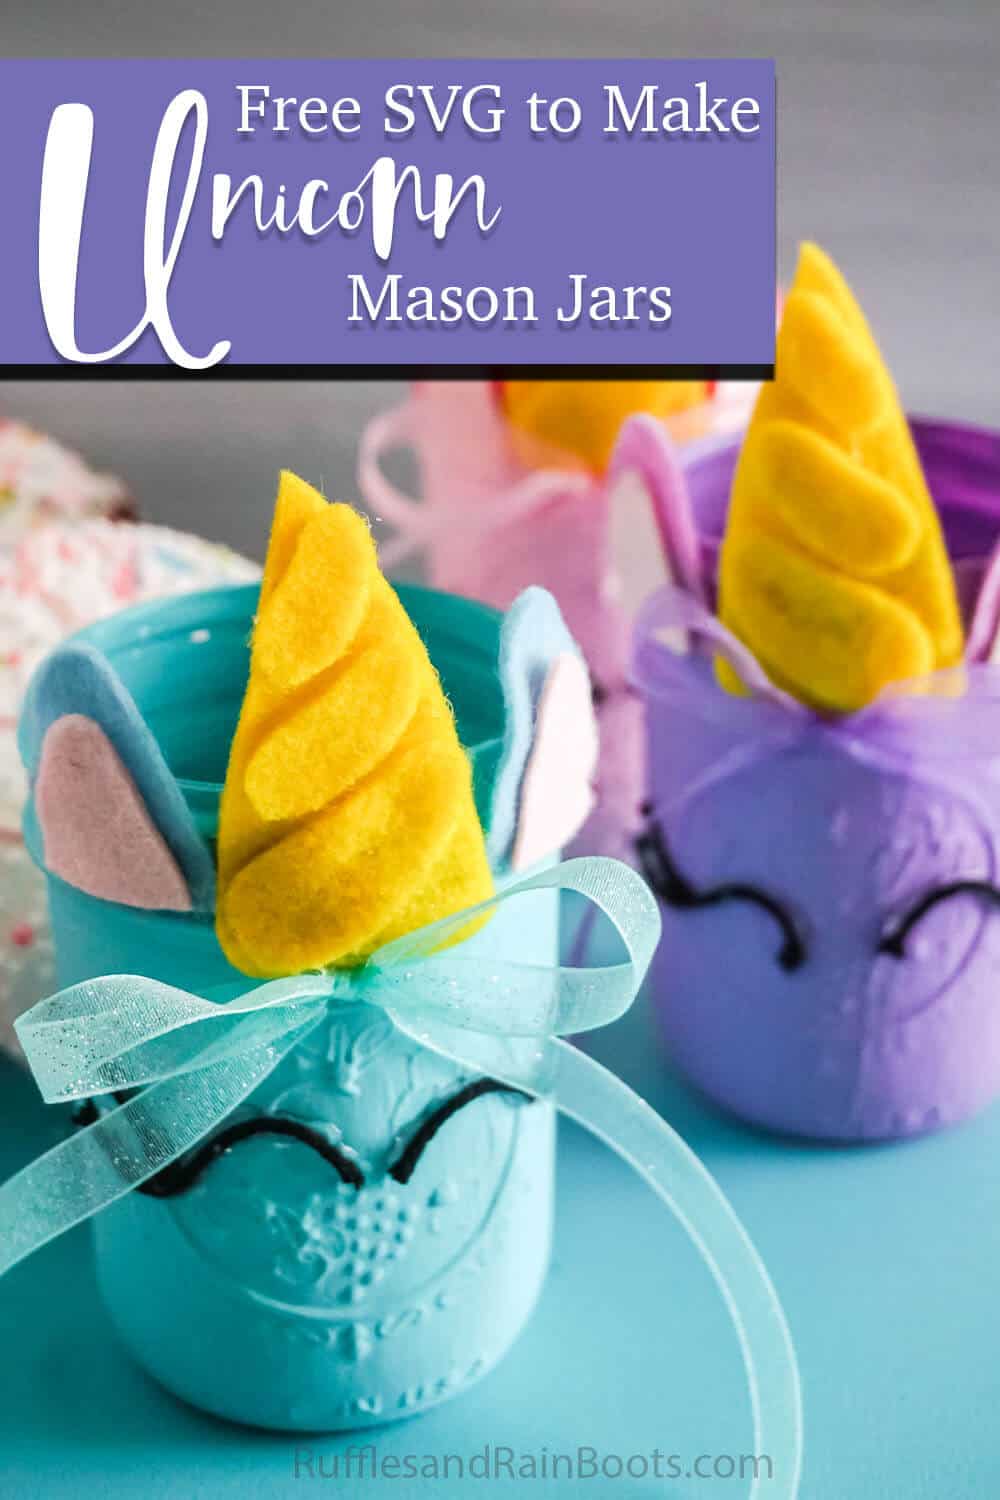 three unicorn jars on a blue table with text which reads free svgs to make unicorn mason jars